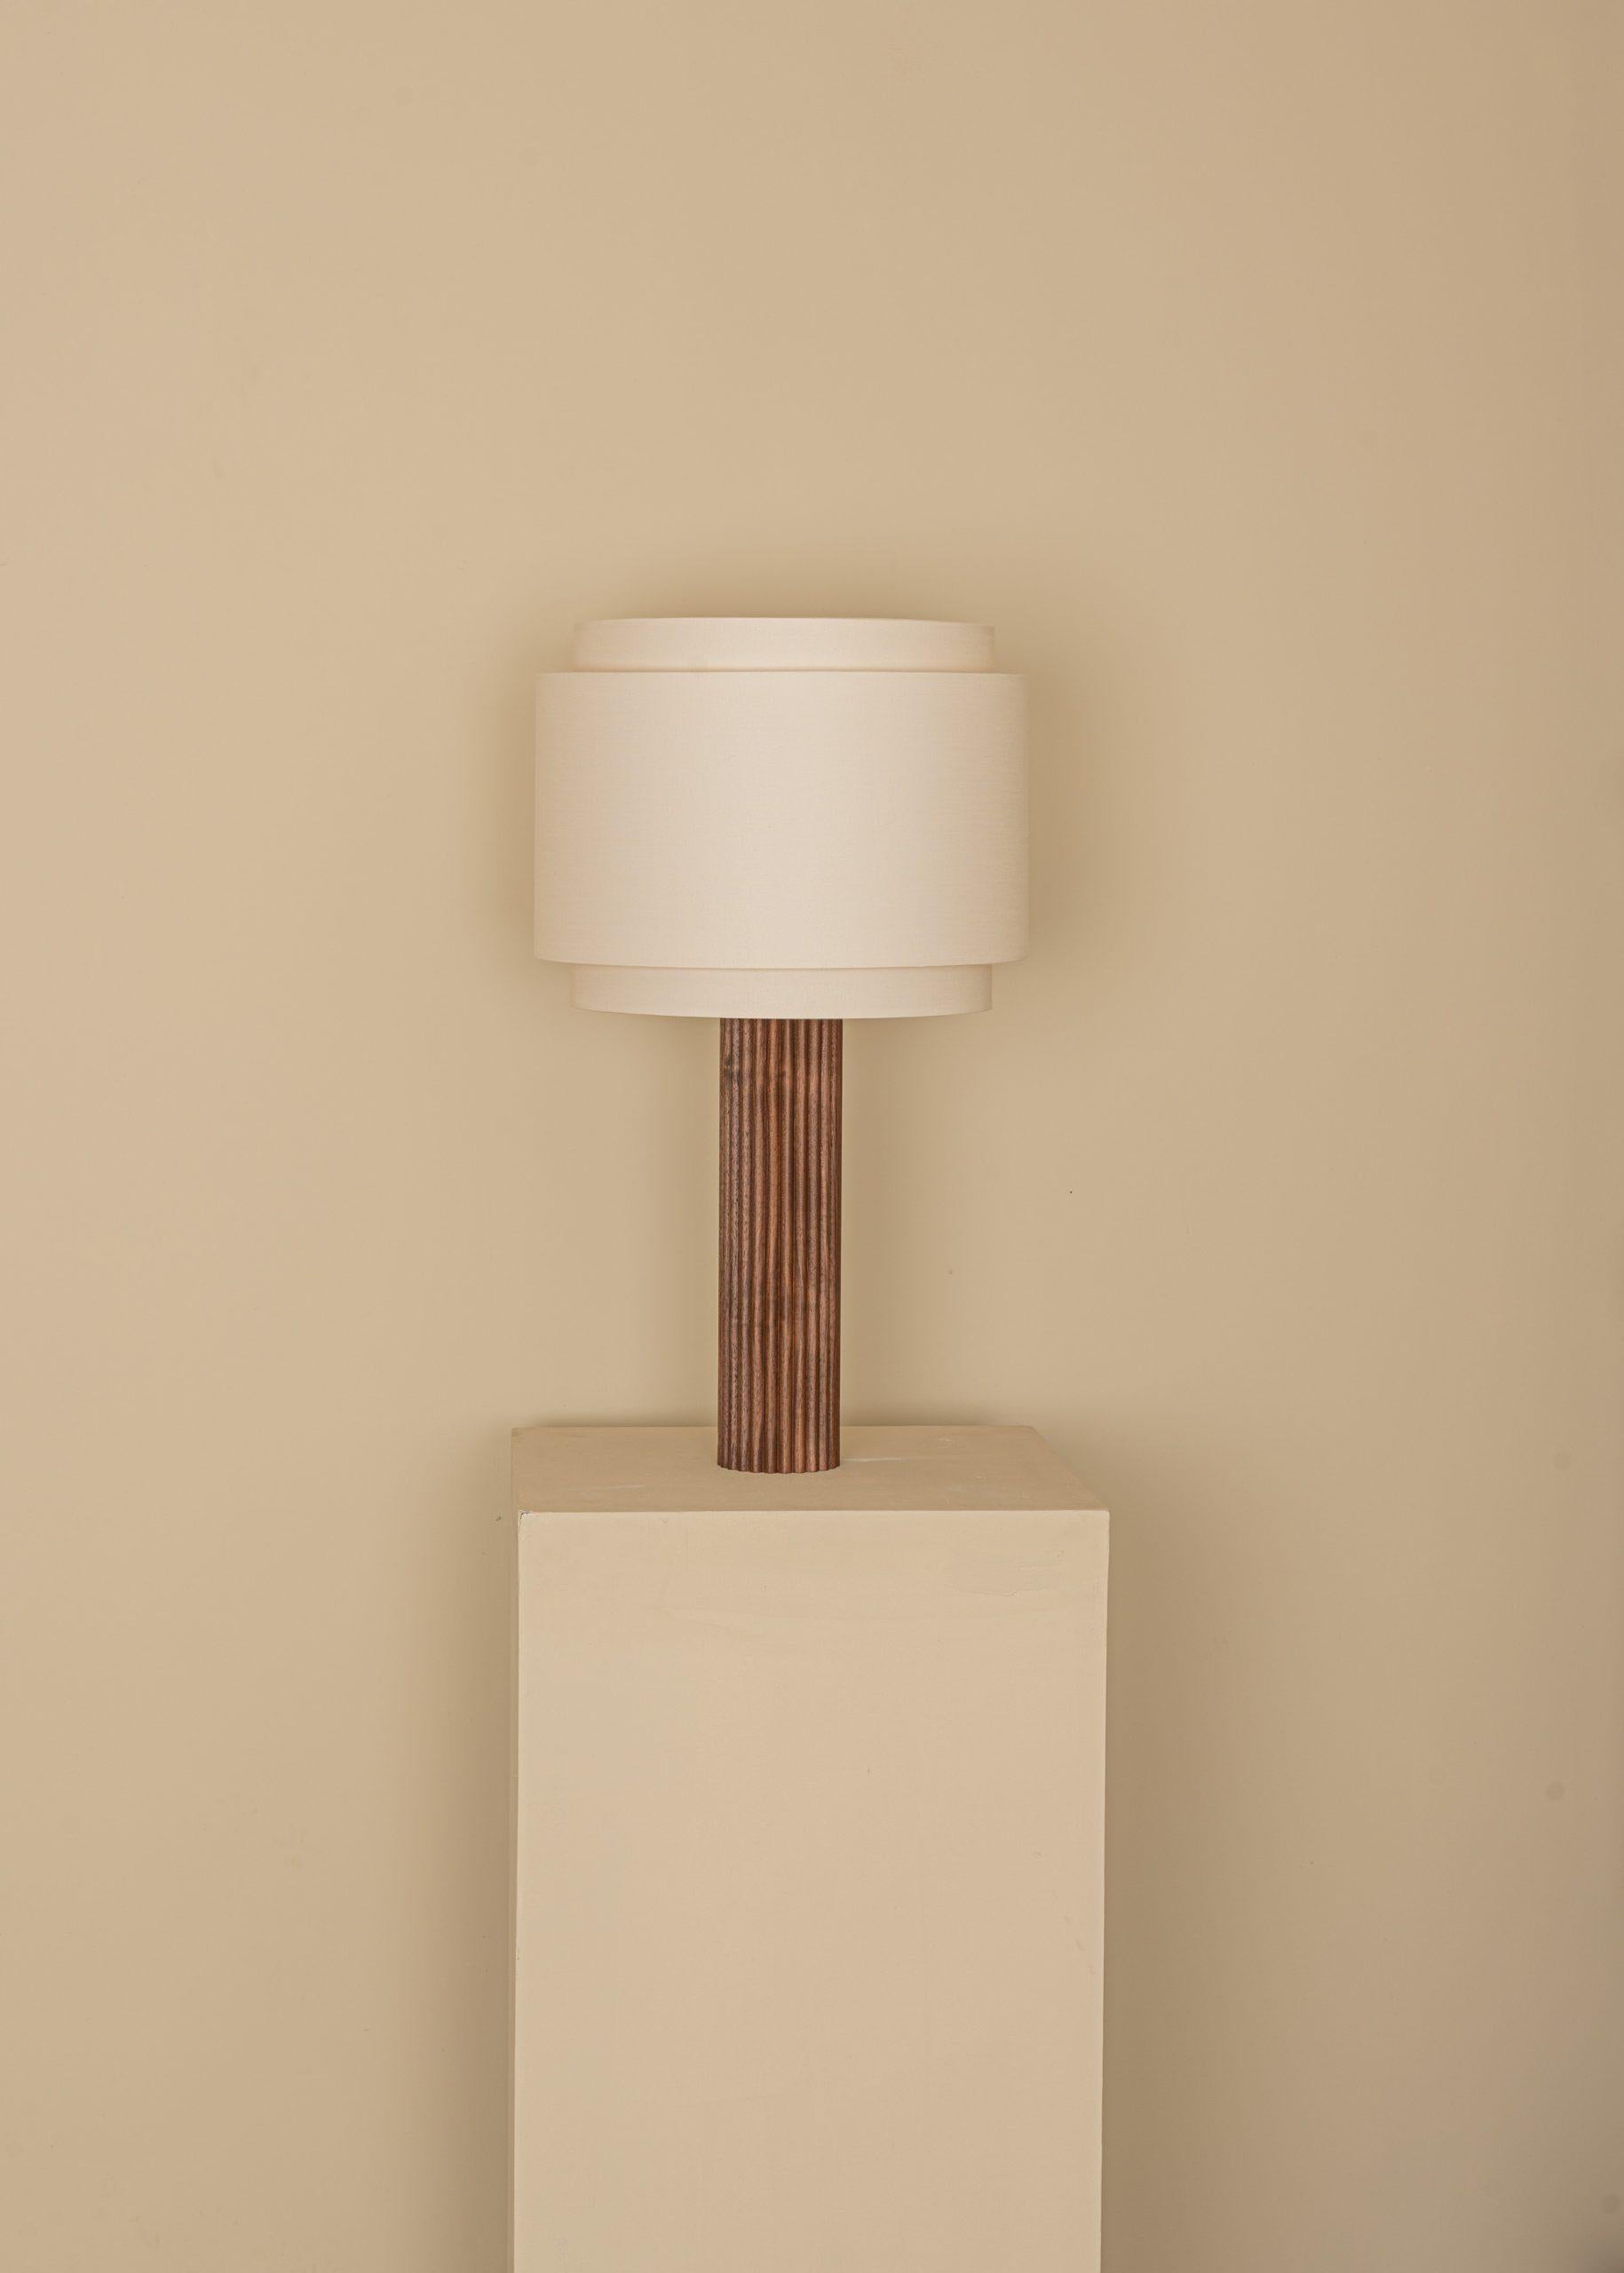 Walnut Fluta Duoble Table Lamp by Simone & Marcel
Dimensions: D 35 x W 35 x H 60 cm.
Materials: Cotton and walnut.

Also available in different marble and wood options and finishes. Custom options available on request. Please contact us. 

All our